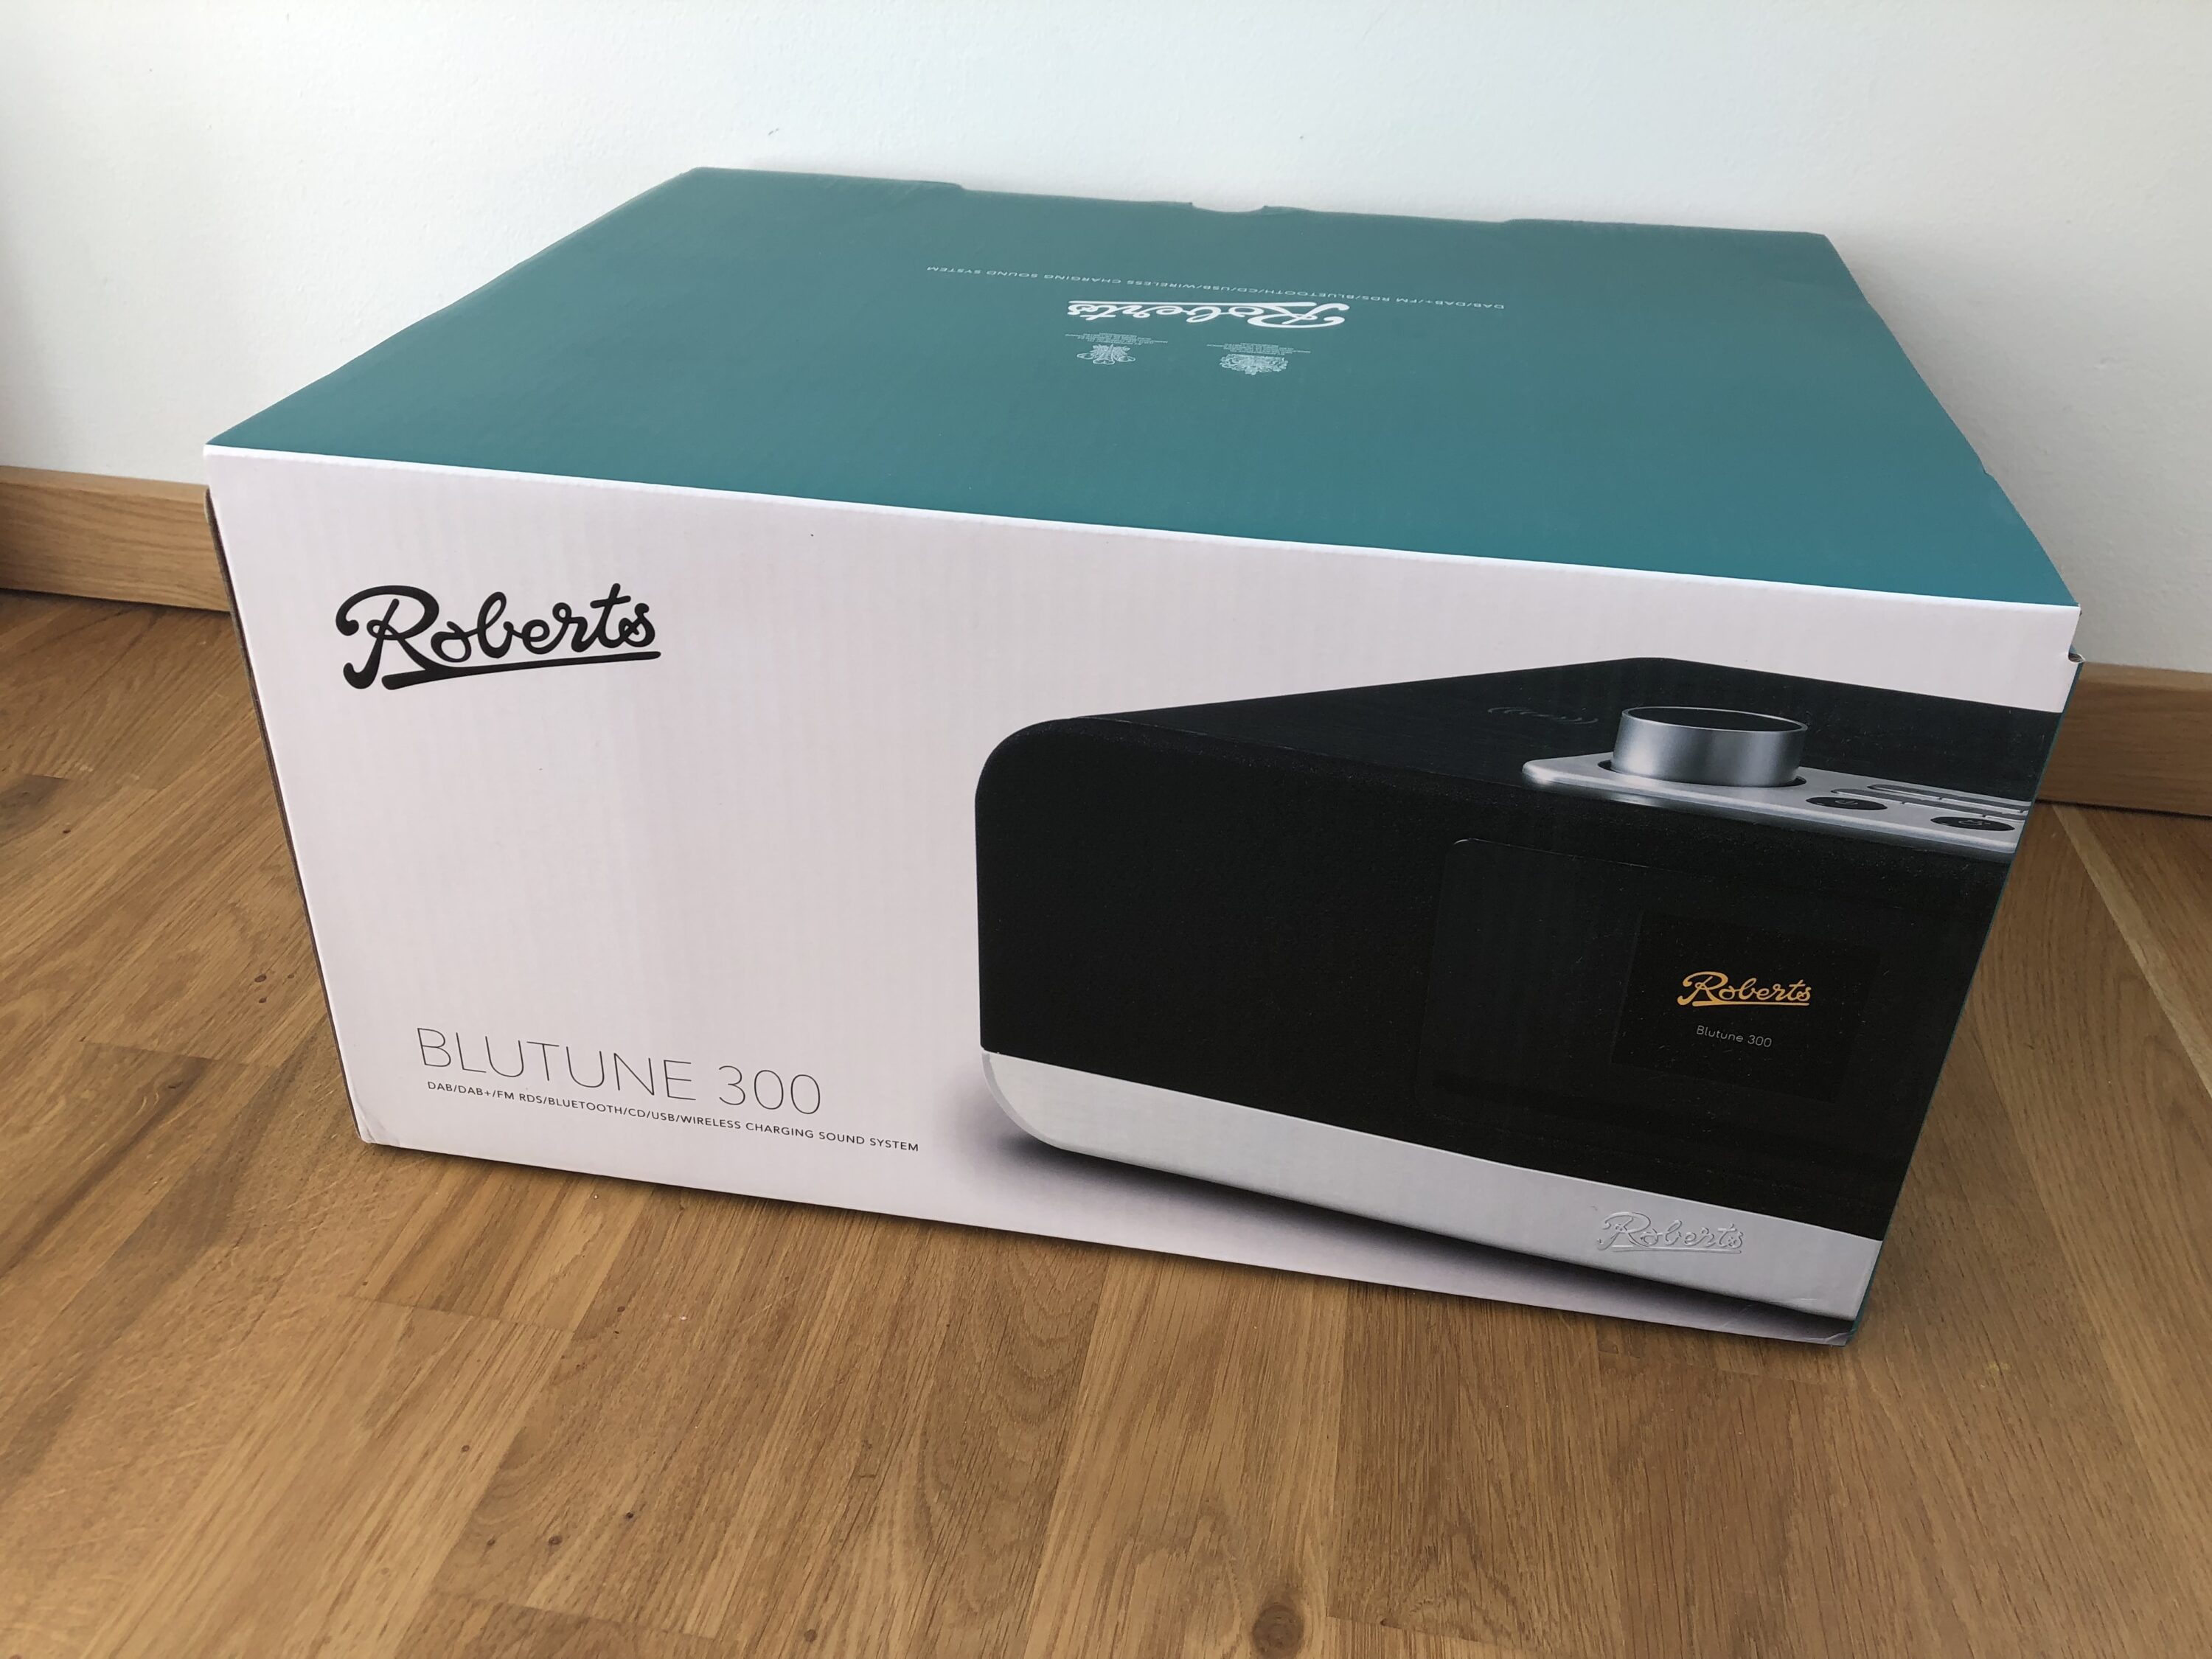 Roberts BluTune 300 review: technology? radio State-of-the-art